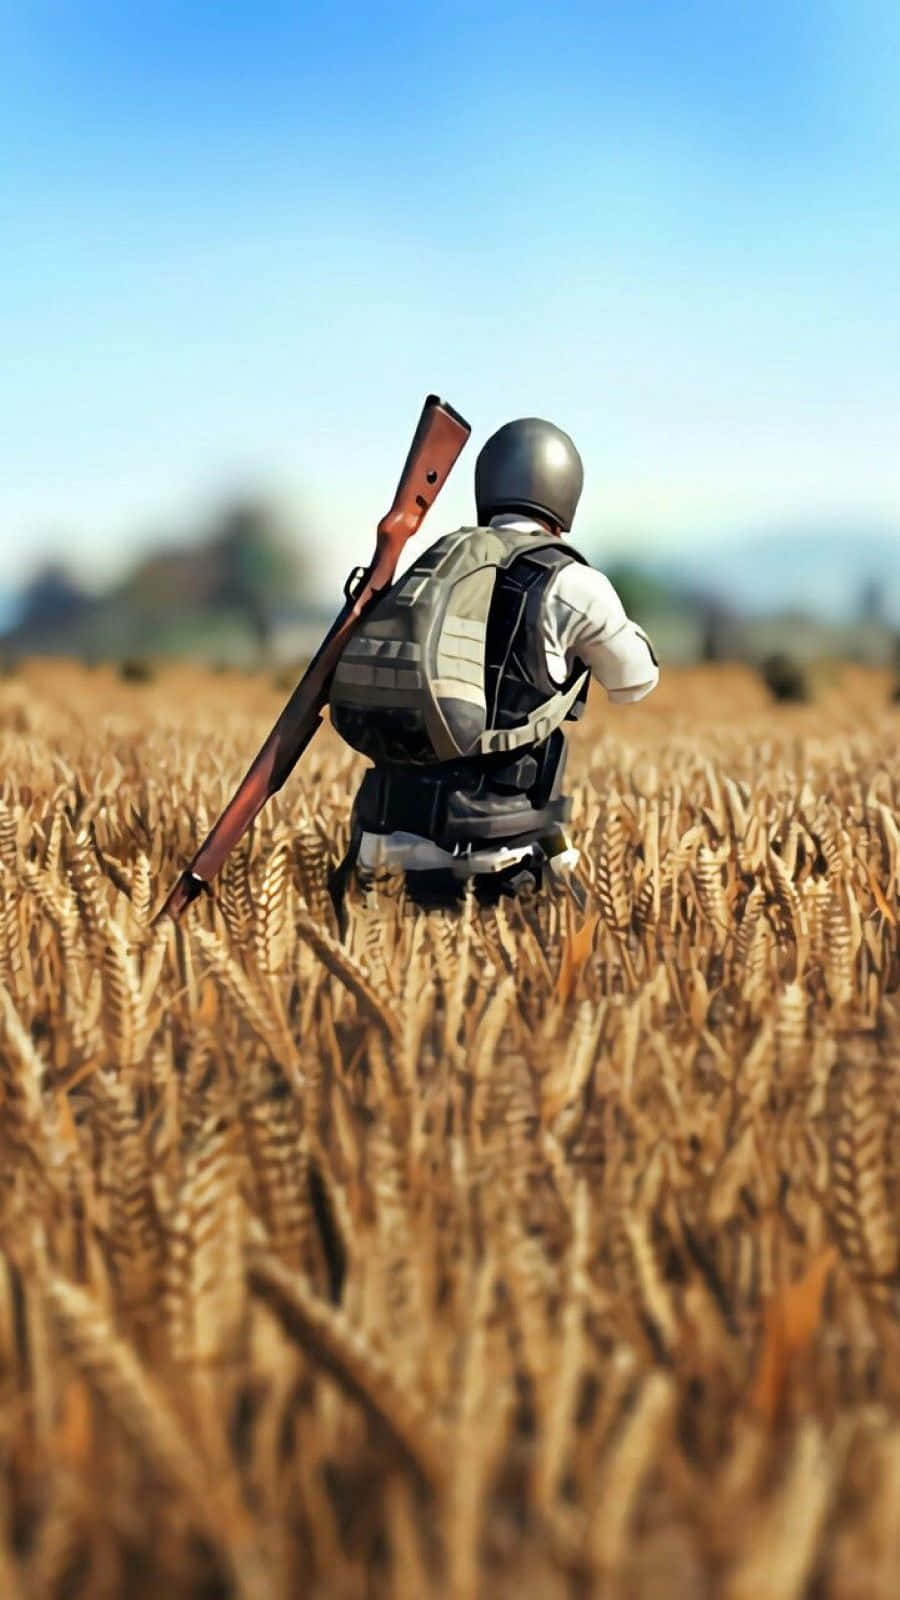 Do You Have What It Takes To Become A Pubg Mobile Champion?